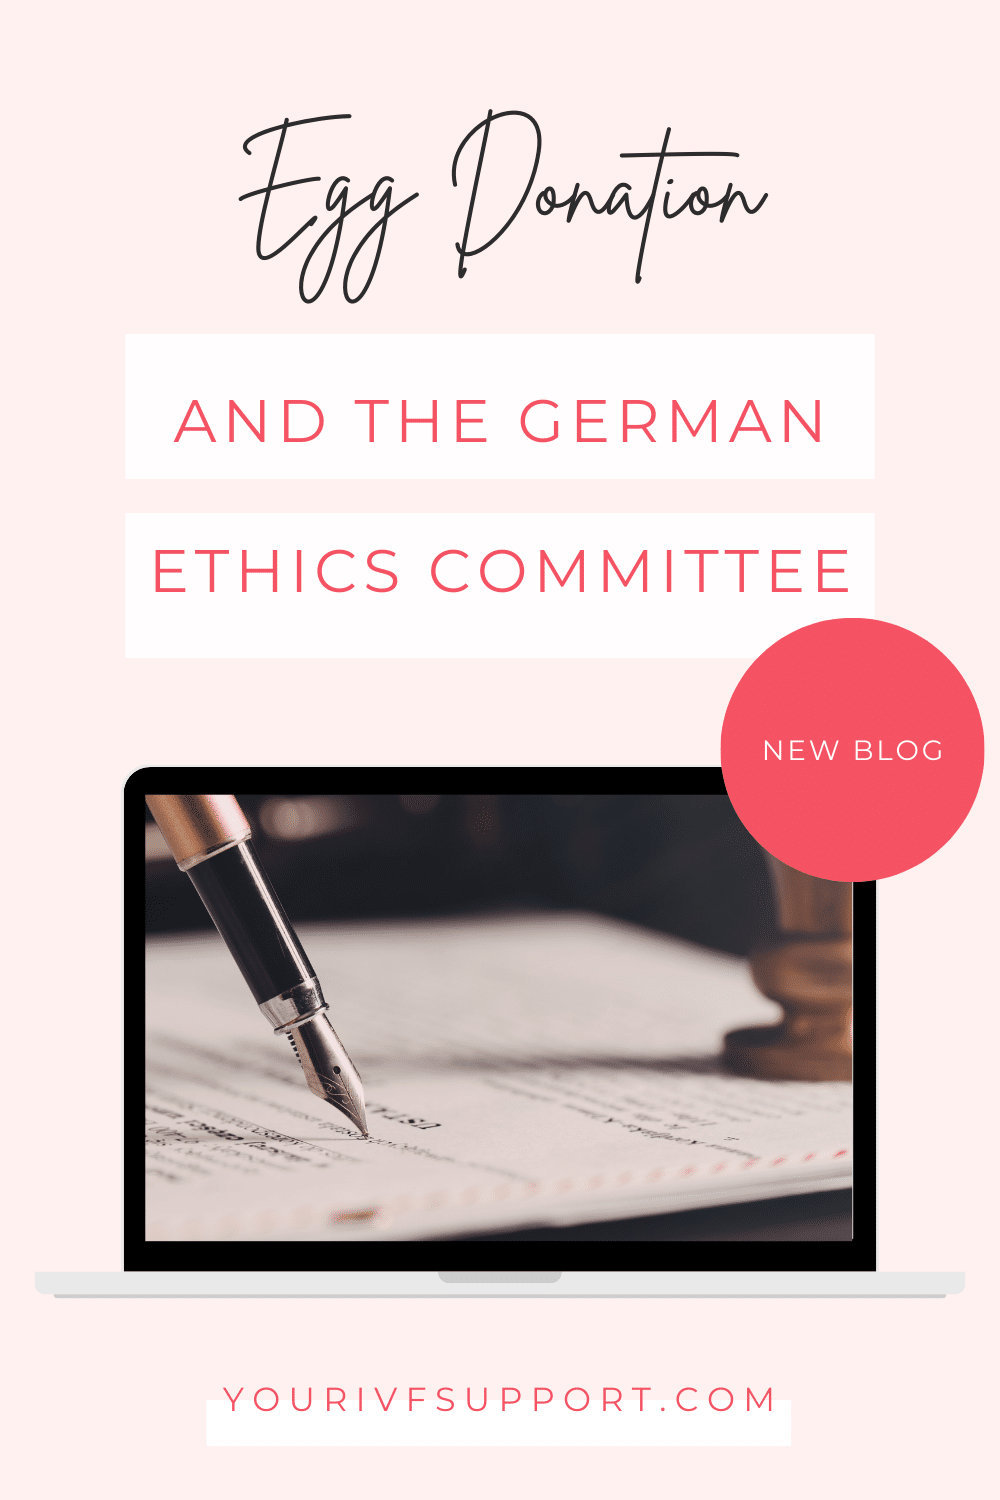 Egg Donation and German Ethics: Insights from the Committee